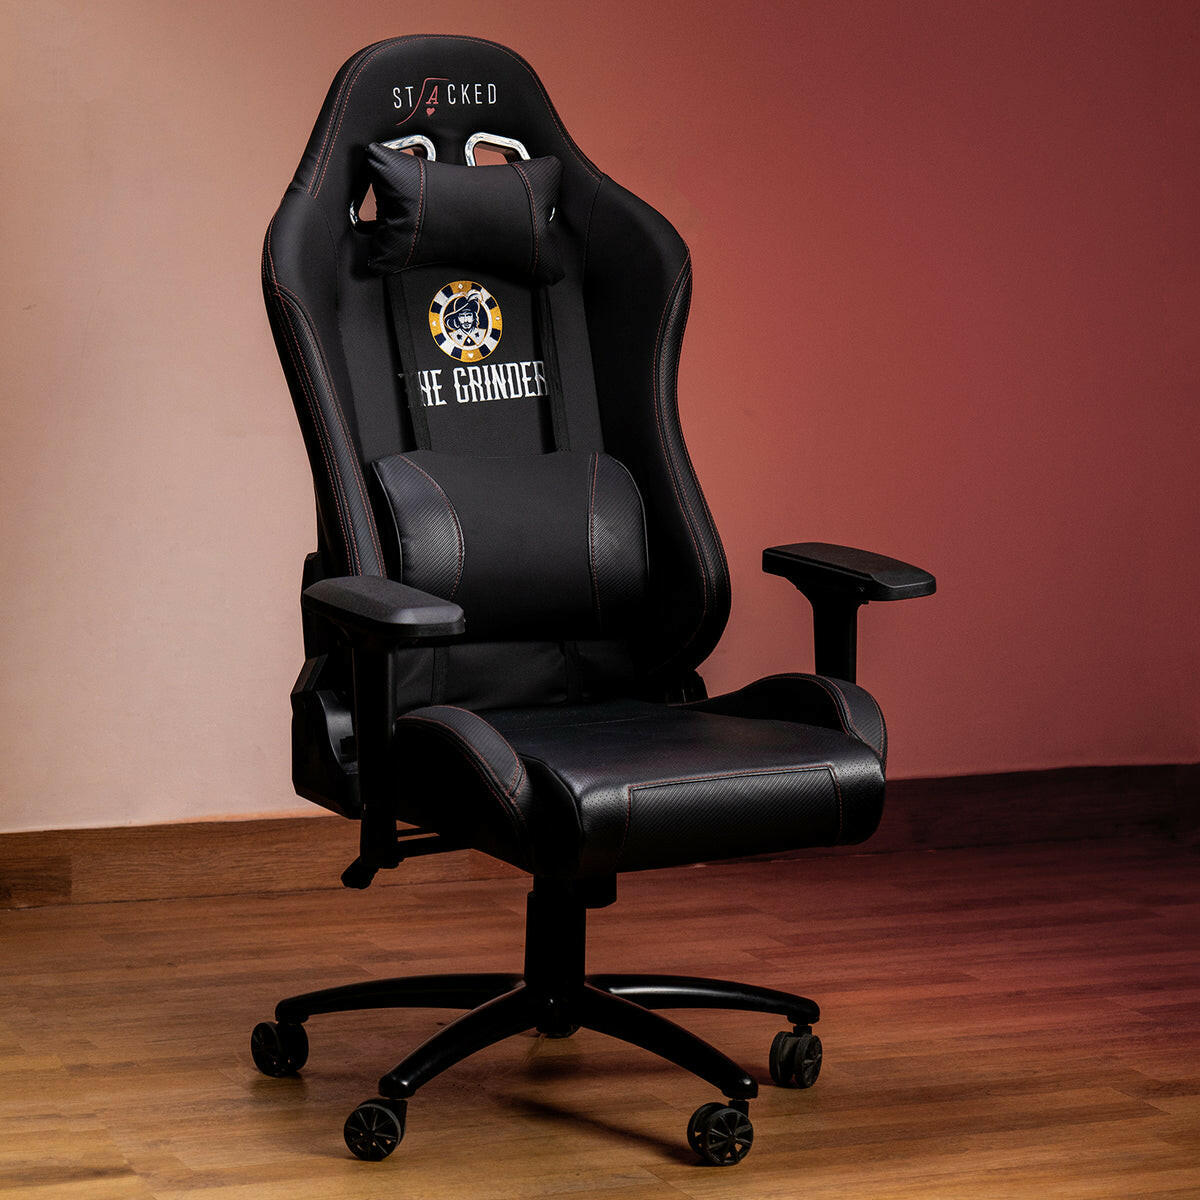 The best gaming chairs and office chairs for working from home - Polygon